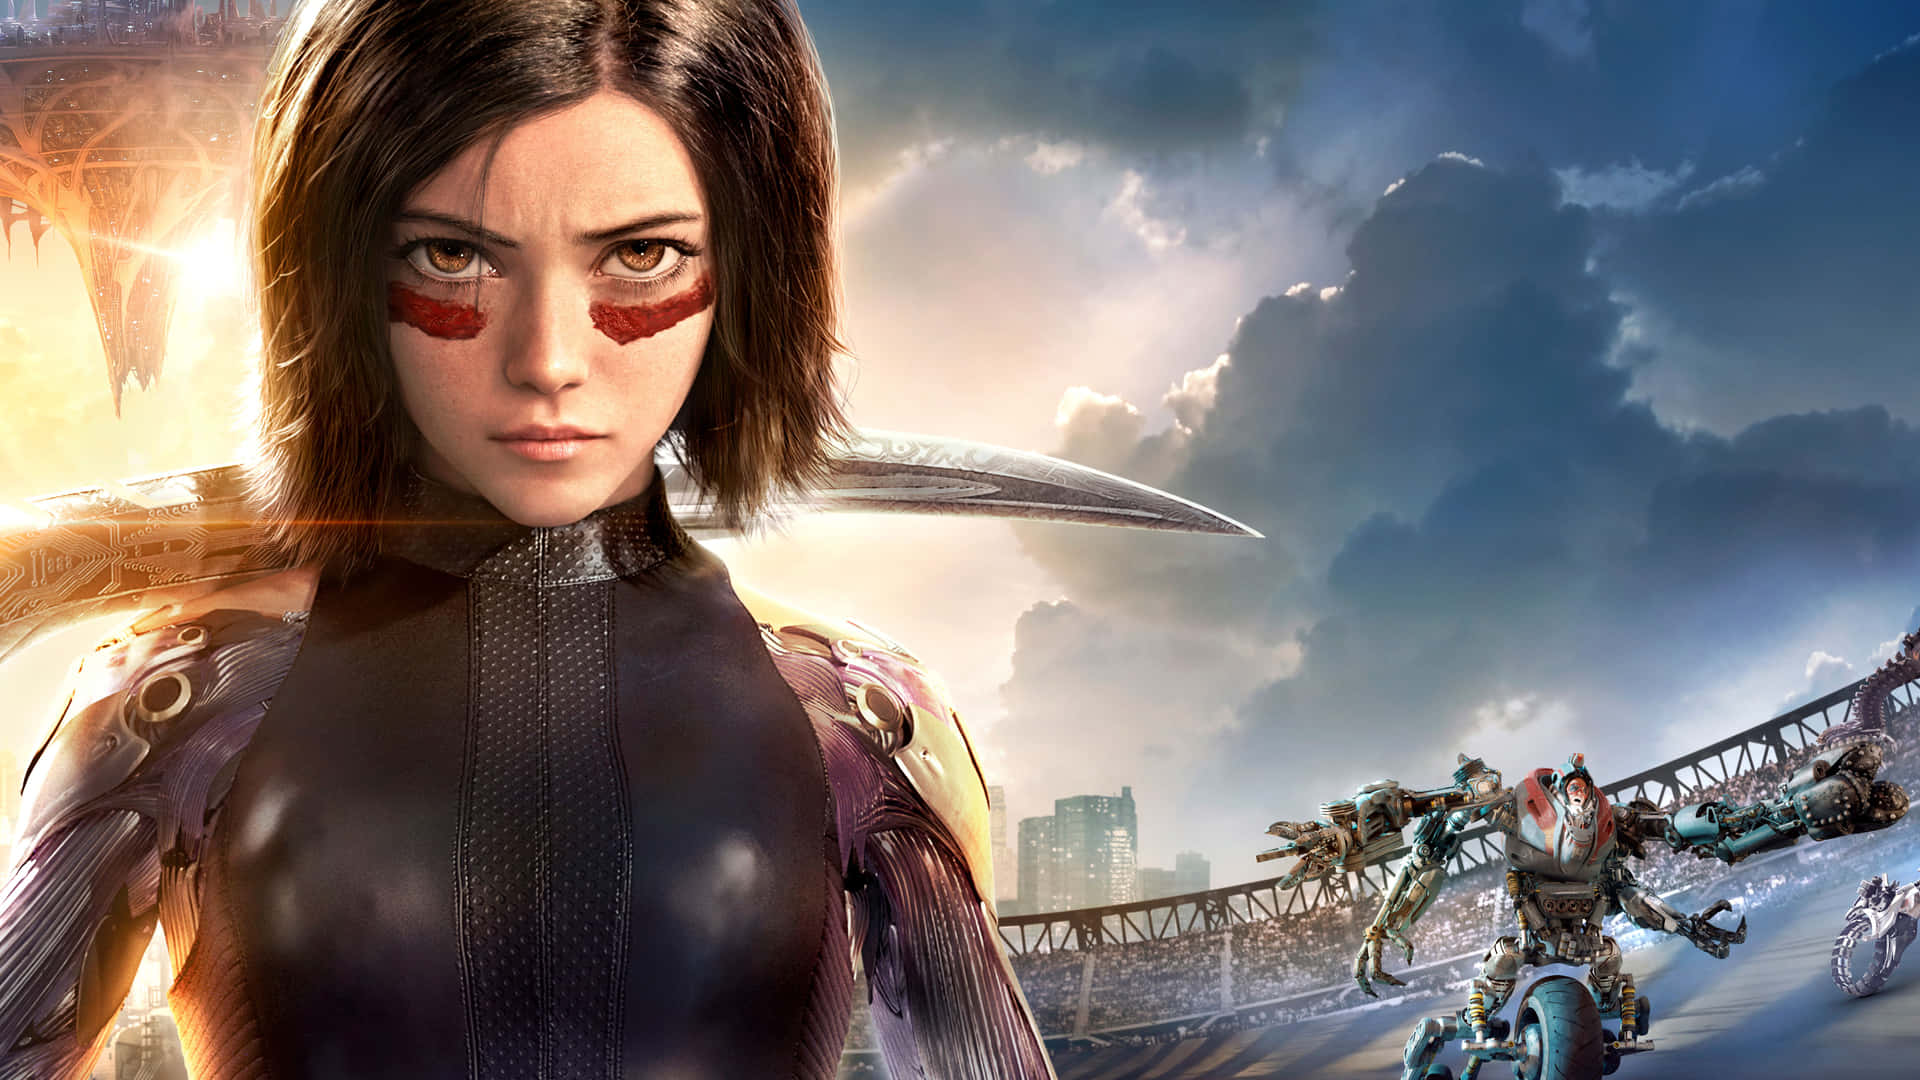 Alita Battle Angel is the story of a human becoming a warrior